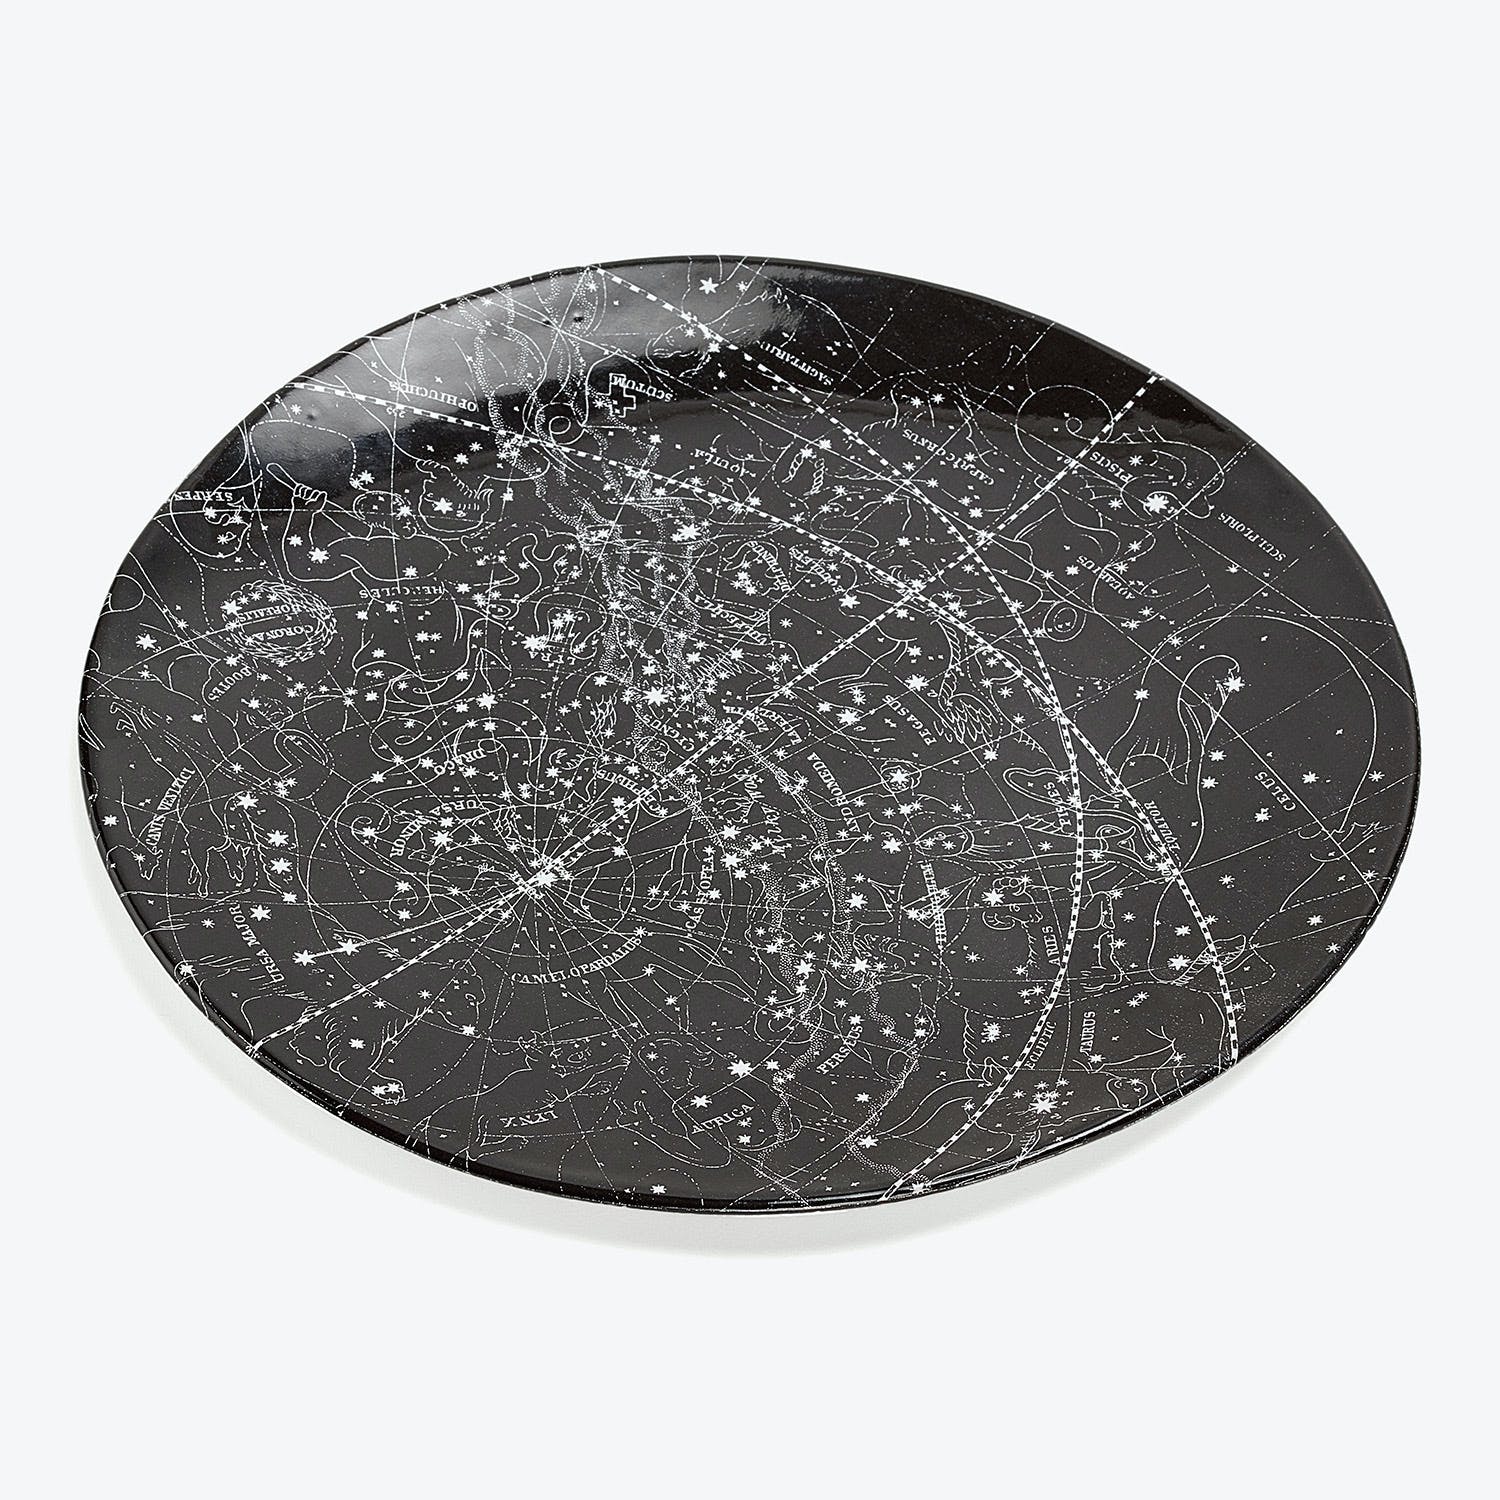 Intricate celestial plate with detailed star chart and constellations